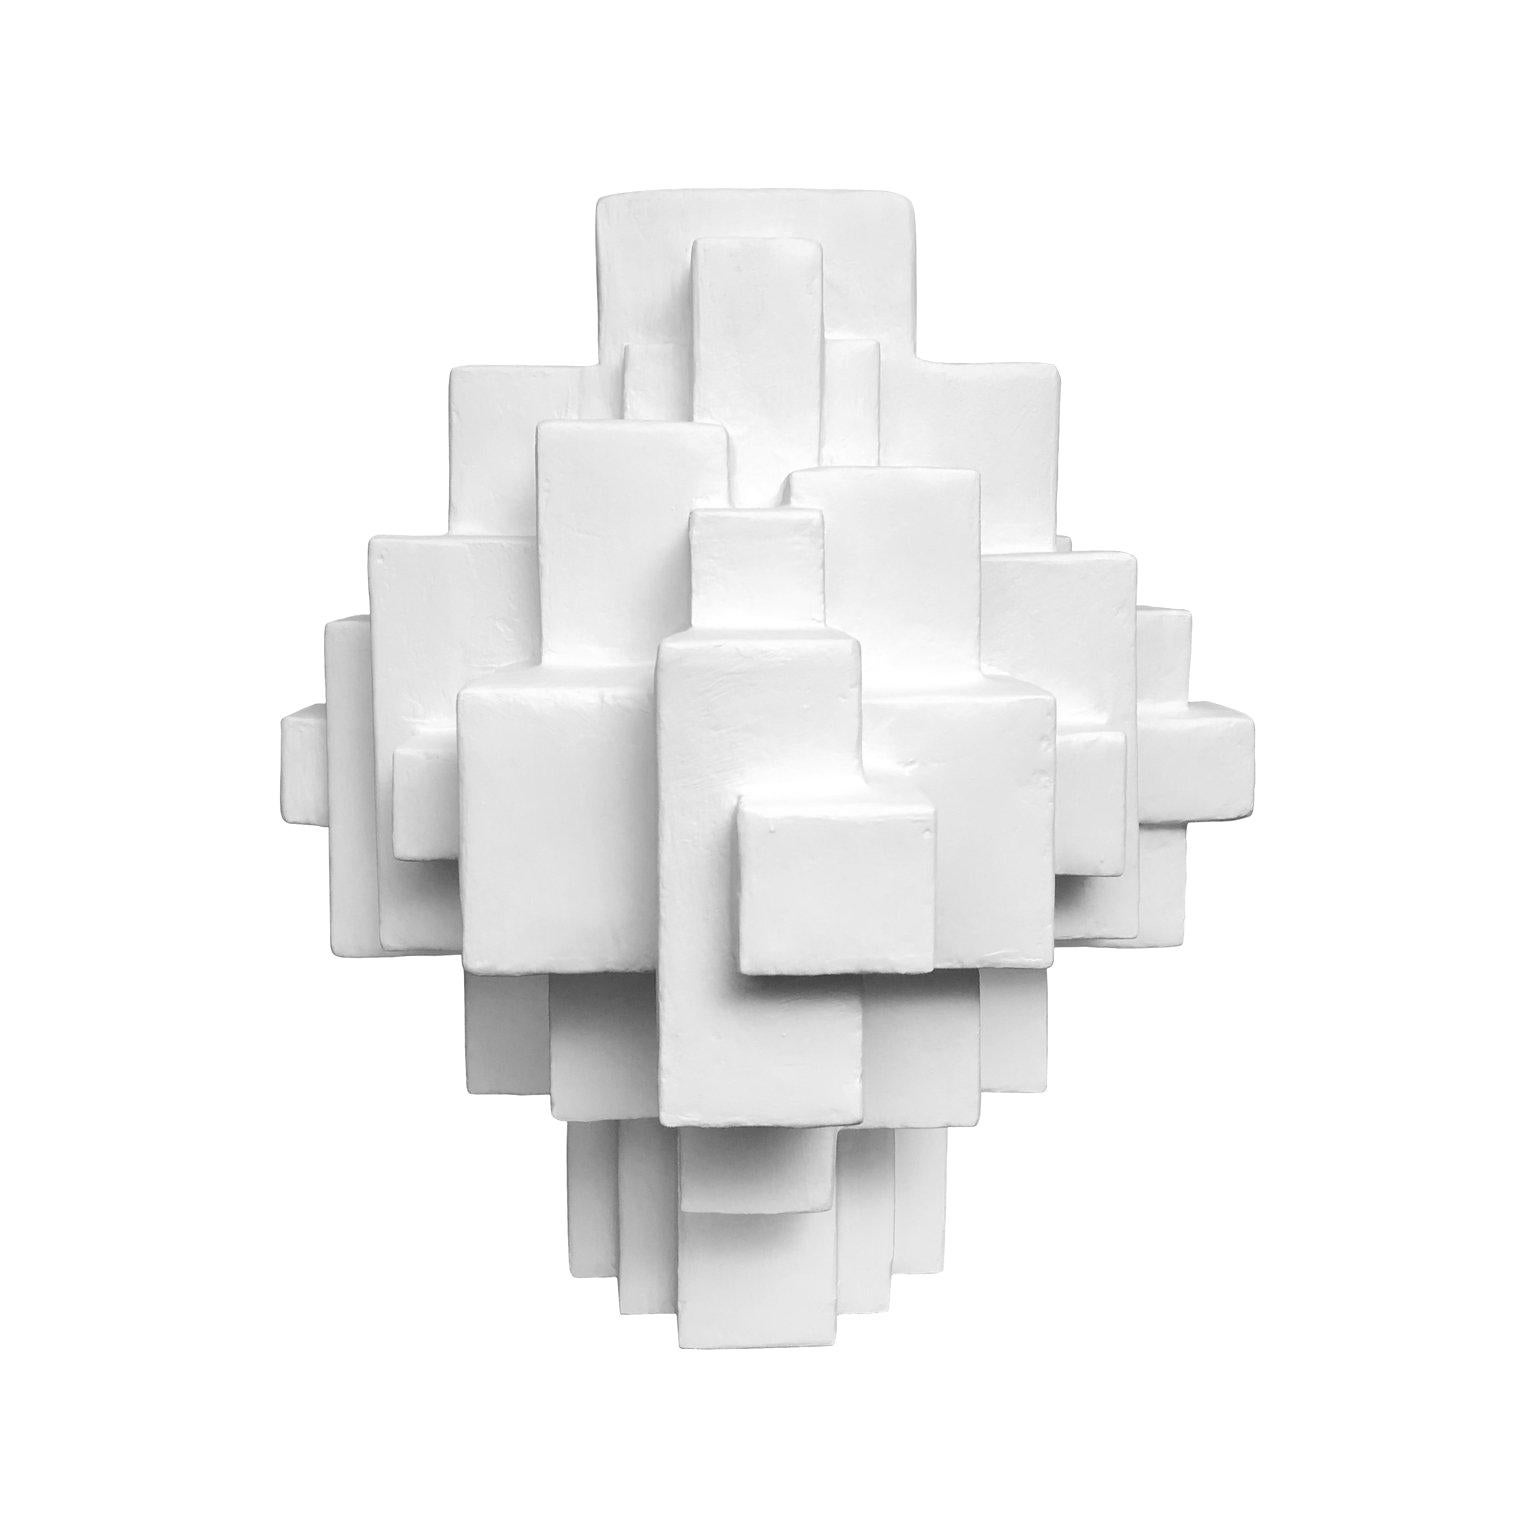 "Composition 11.2" Table Sculpture in White Finish by Dan Schneiger For Sale